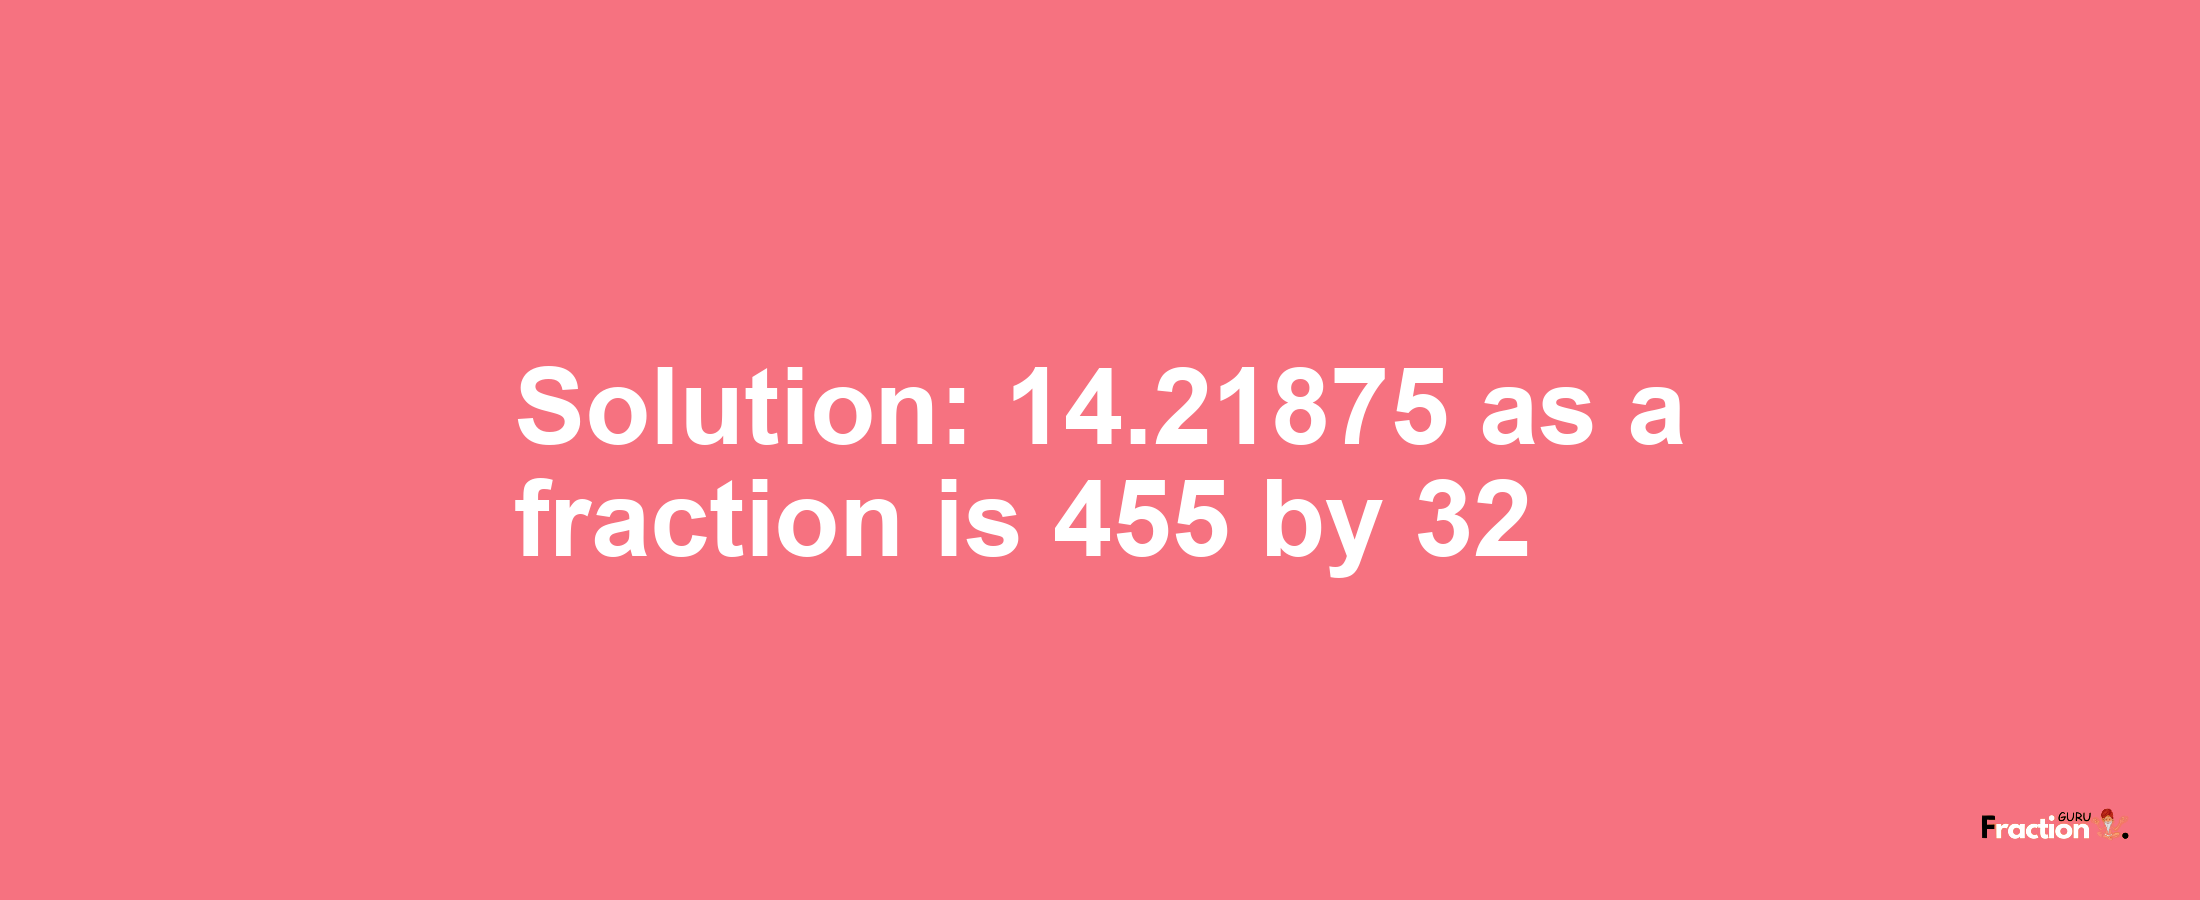 Solution:14.21875 as a fraction is 455/32